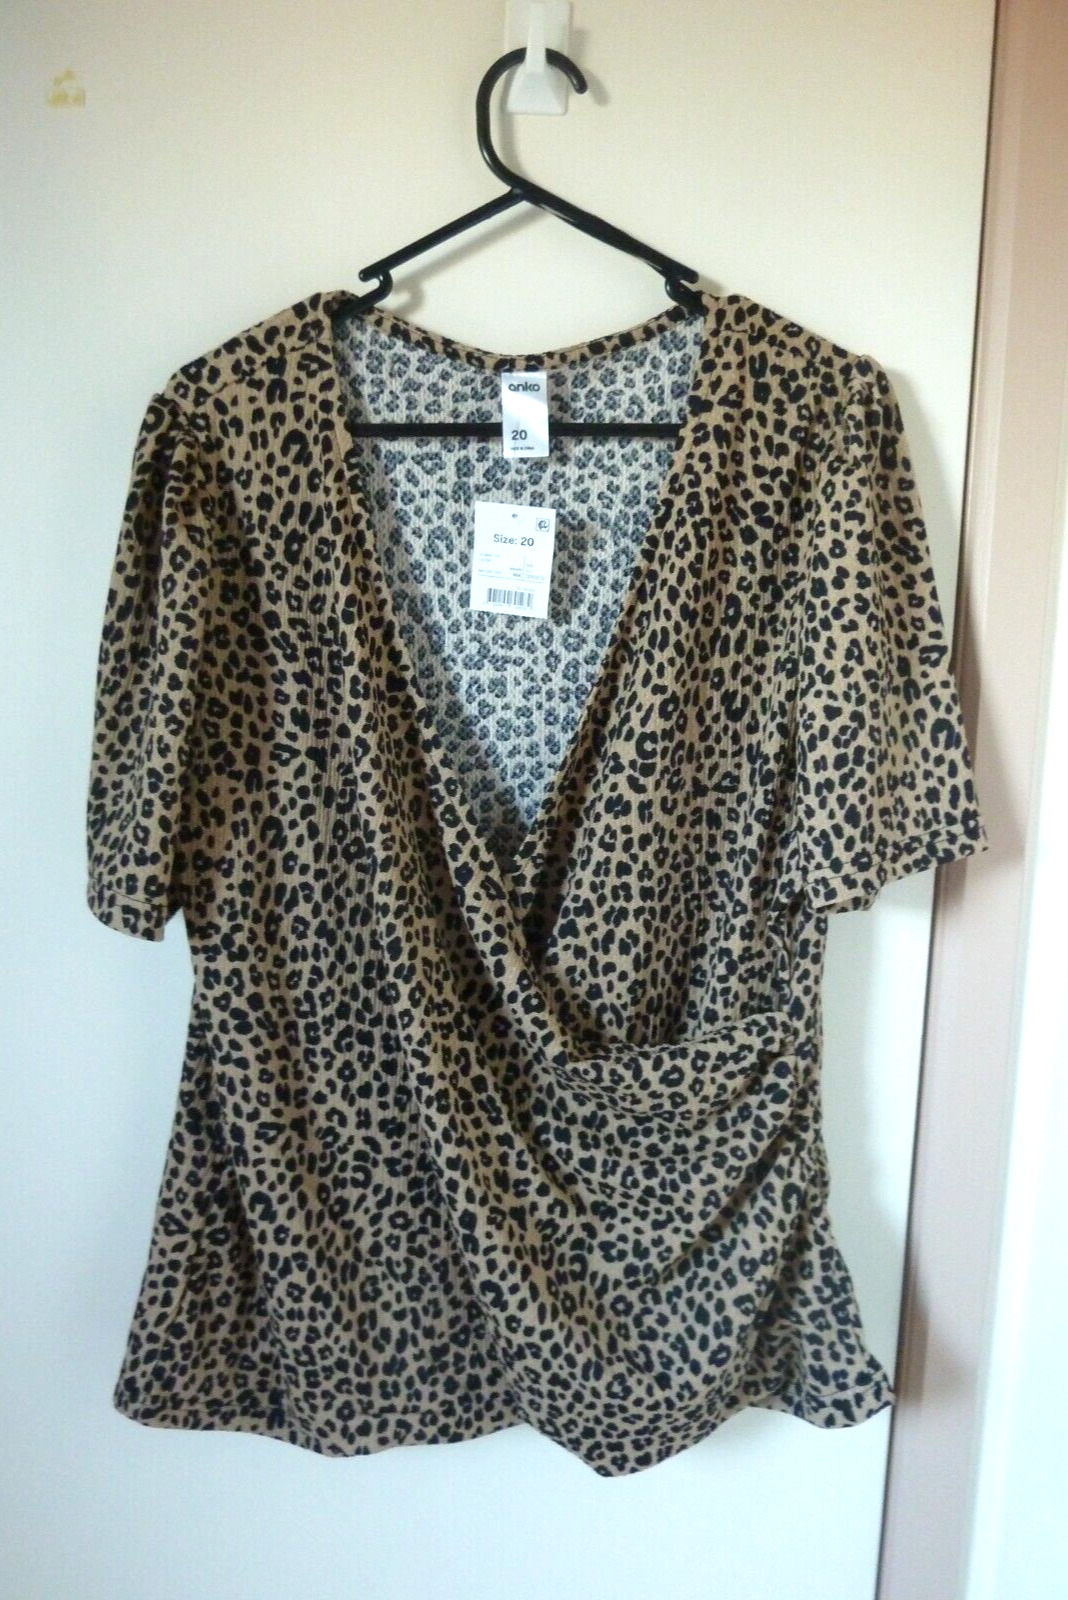 BNWT Womens Size 20 Anko Leopard Print Ruched Top with Short Sleeves